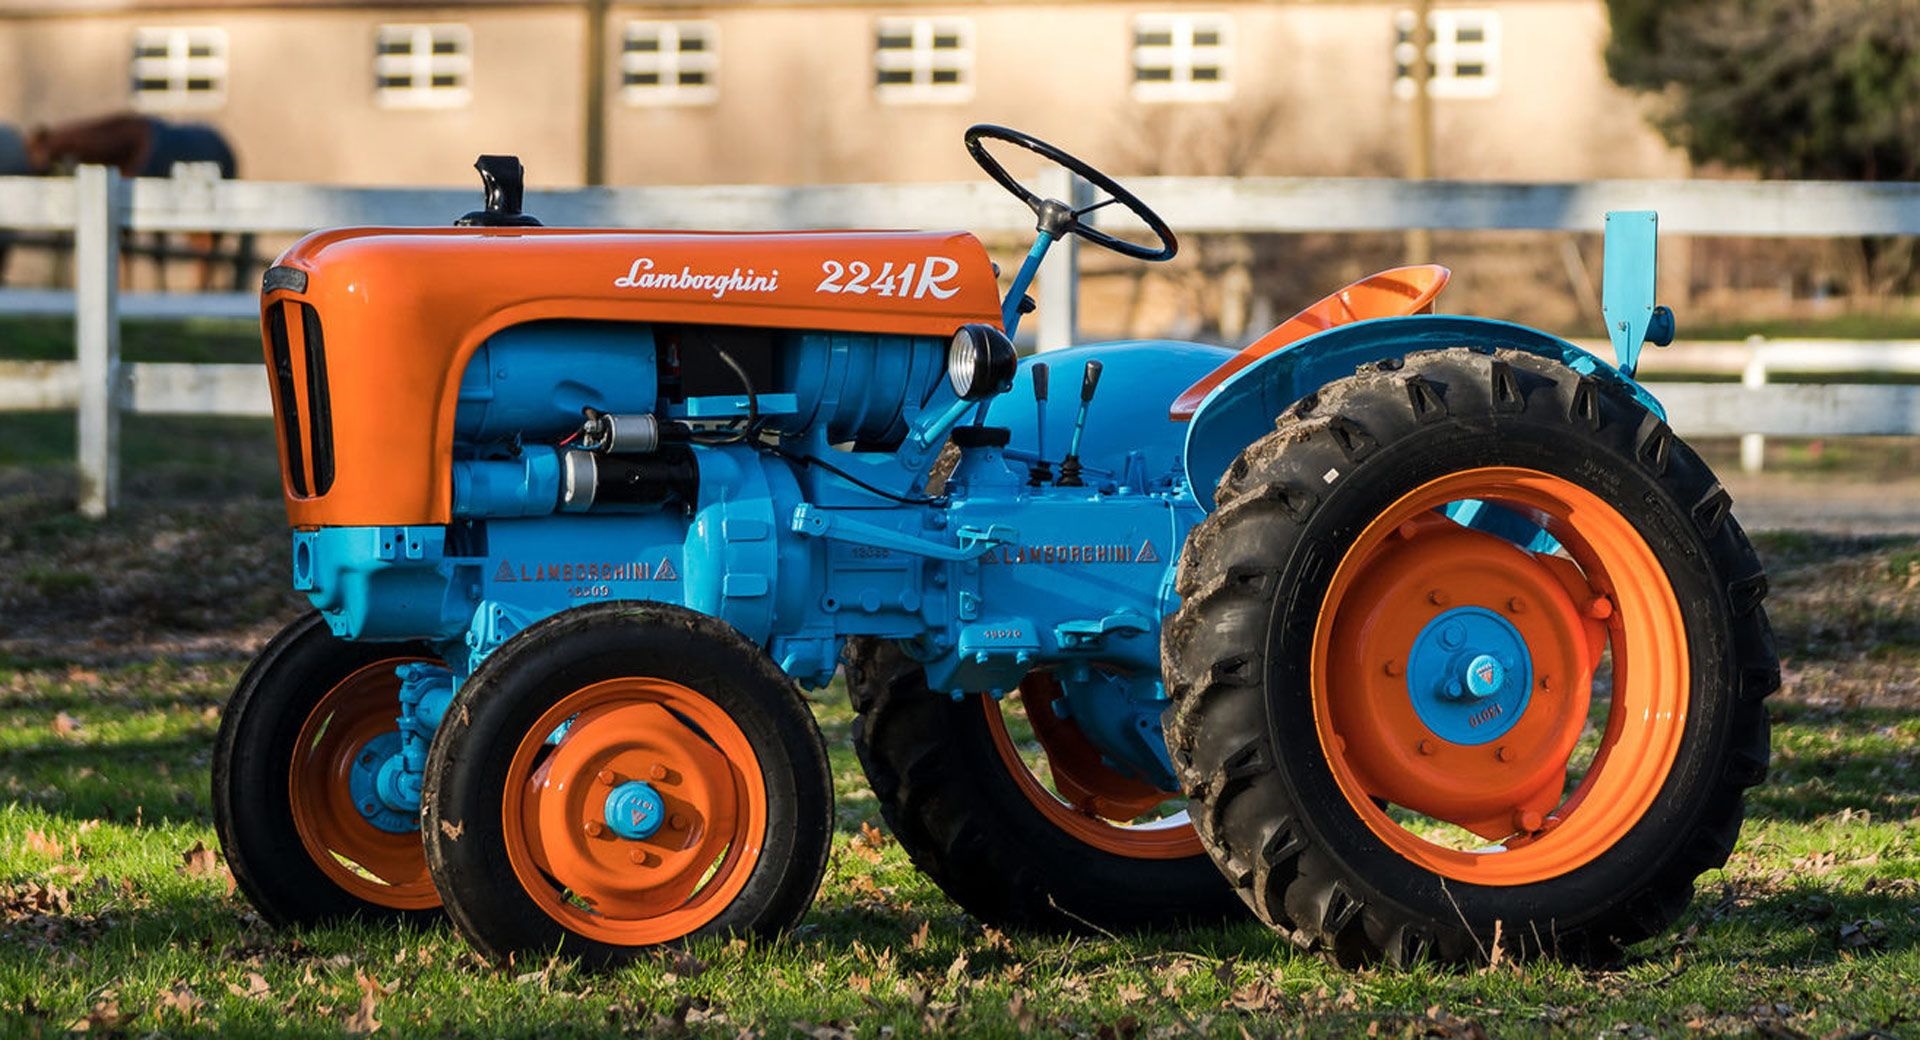 which Entrepreneur made Tractors before entering the Sports car Business